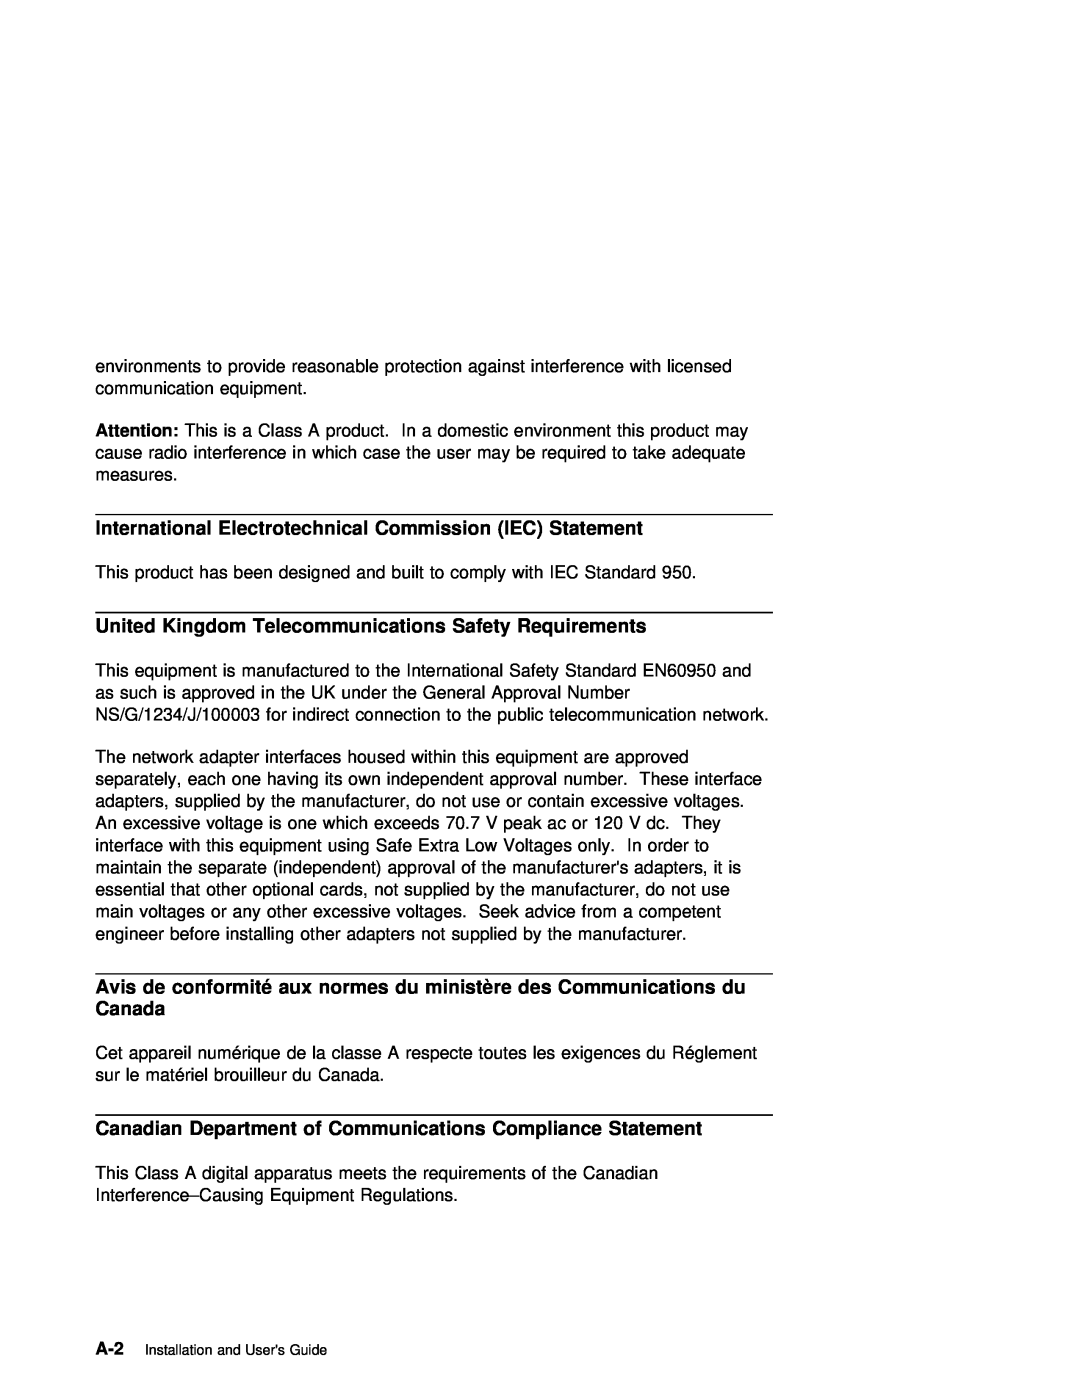 IBM ARTIC960RxD manual International Electrotechnical Commission IEC Statement, Safety Requirements, Avis, ministère des 